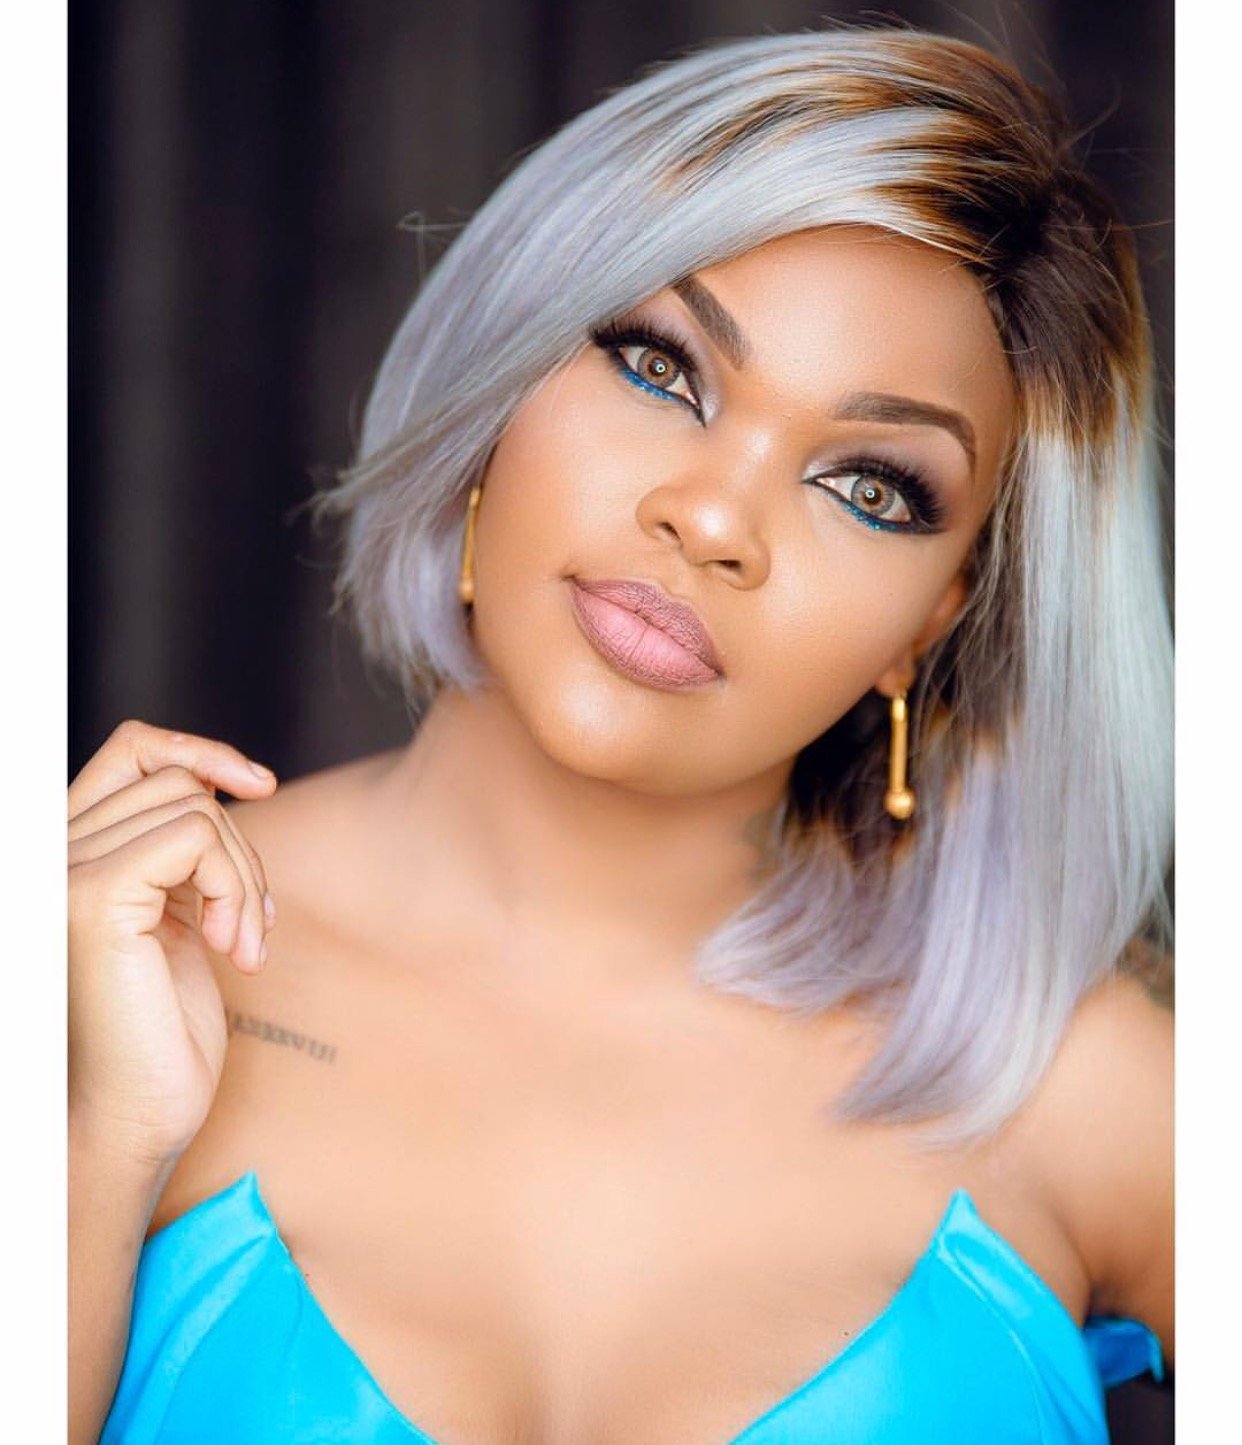 Wema Sepetu stuns in new photos leaving fans drooling over her curvy figure